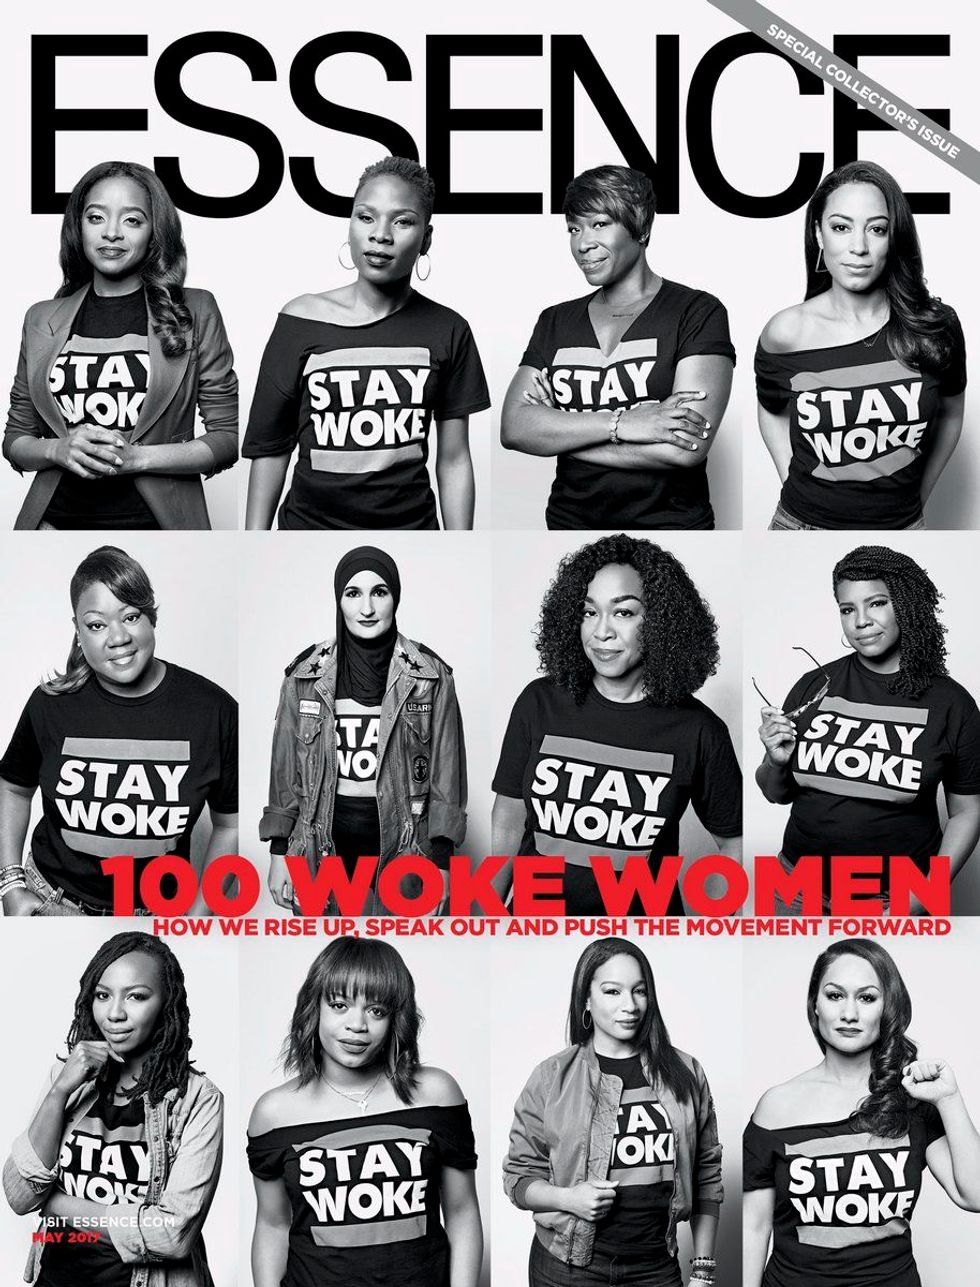 Luvvie Ajayi, Opal Tometi and More, Recognized In Essence's 'Woke 100 Women' Issue